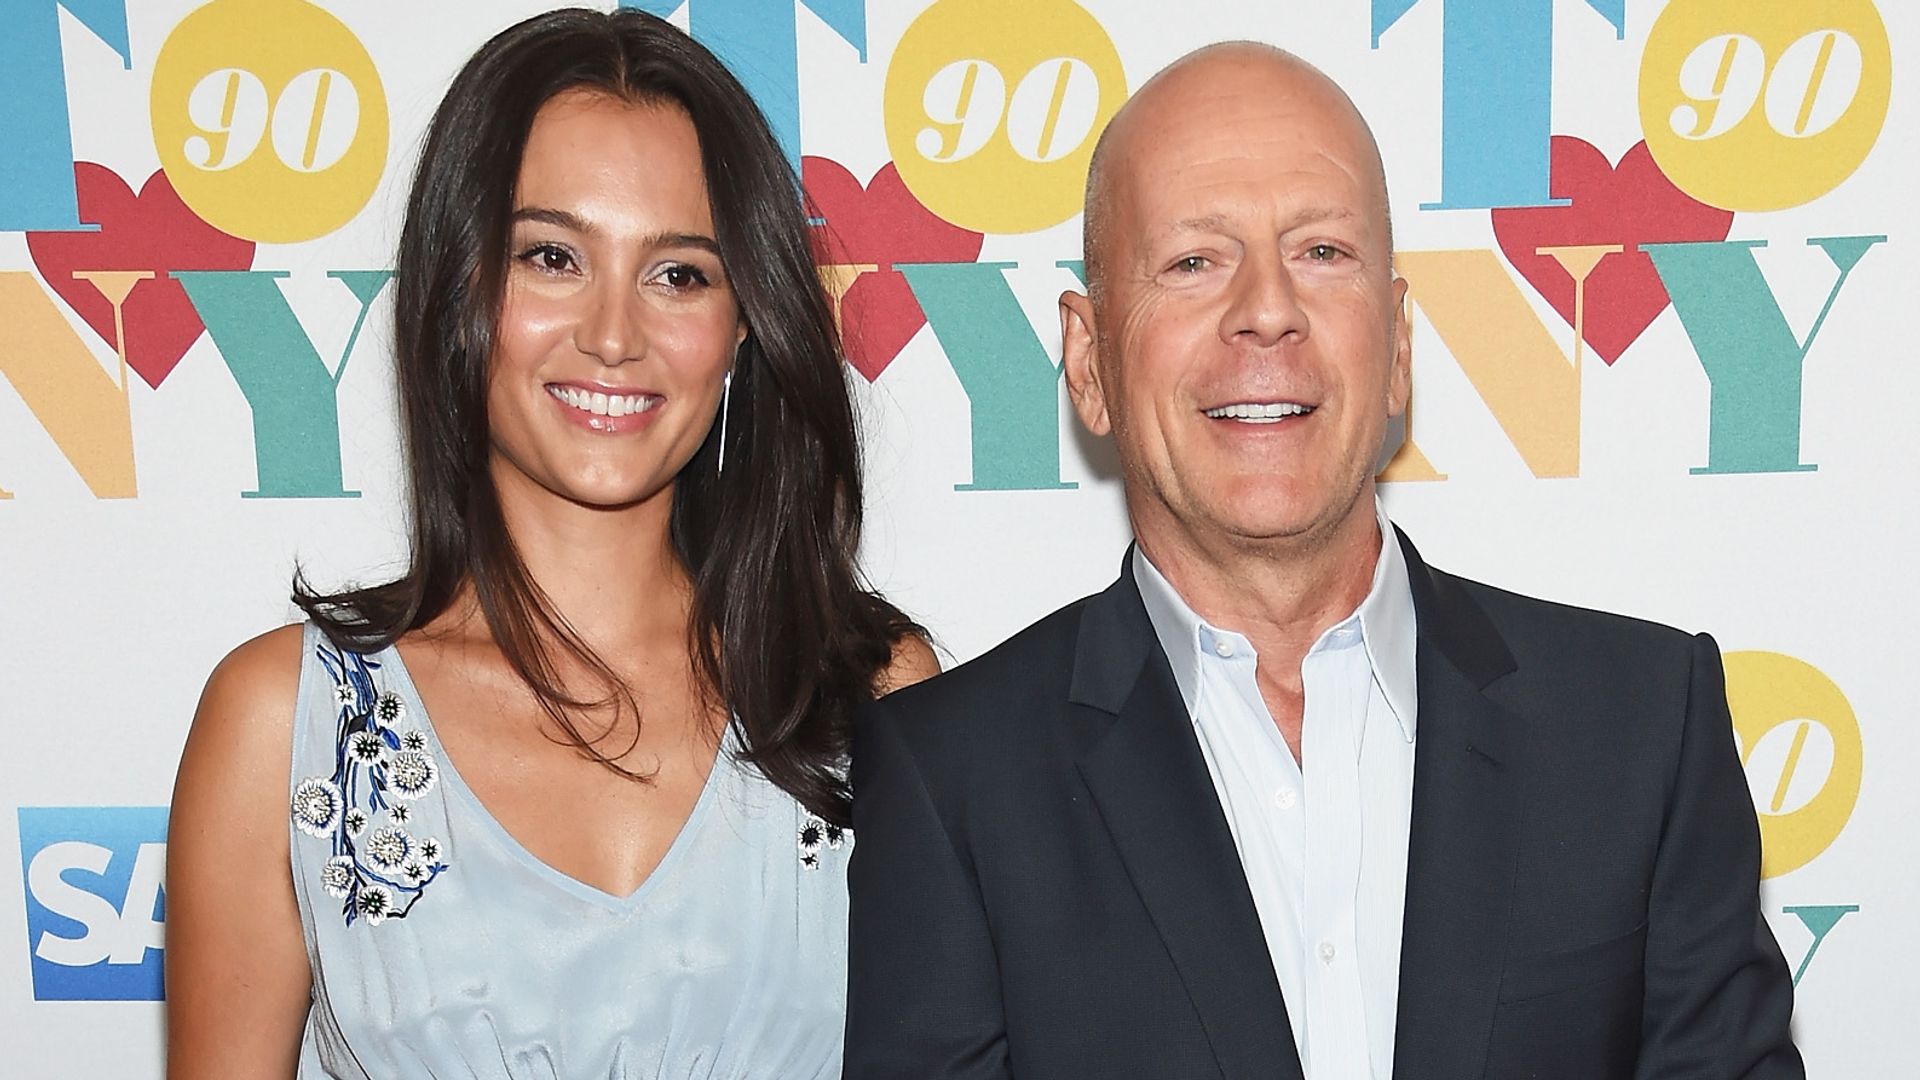 Bruce Willis' daughters react as he smiles ear-to-ear in loved-up photo from Emma Heming